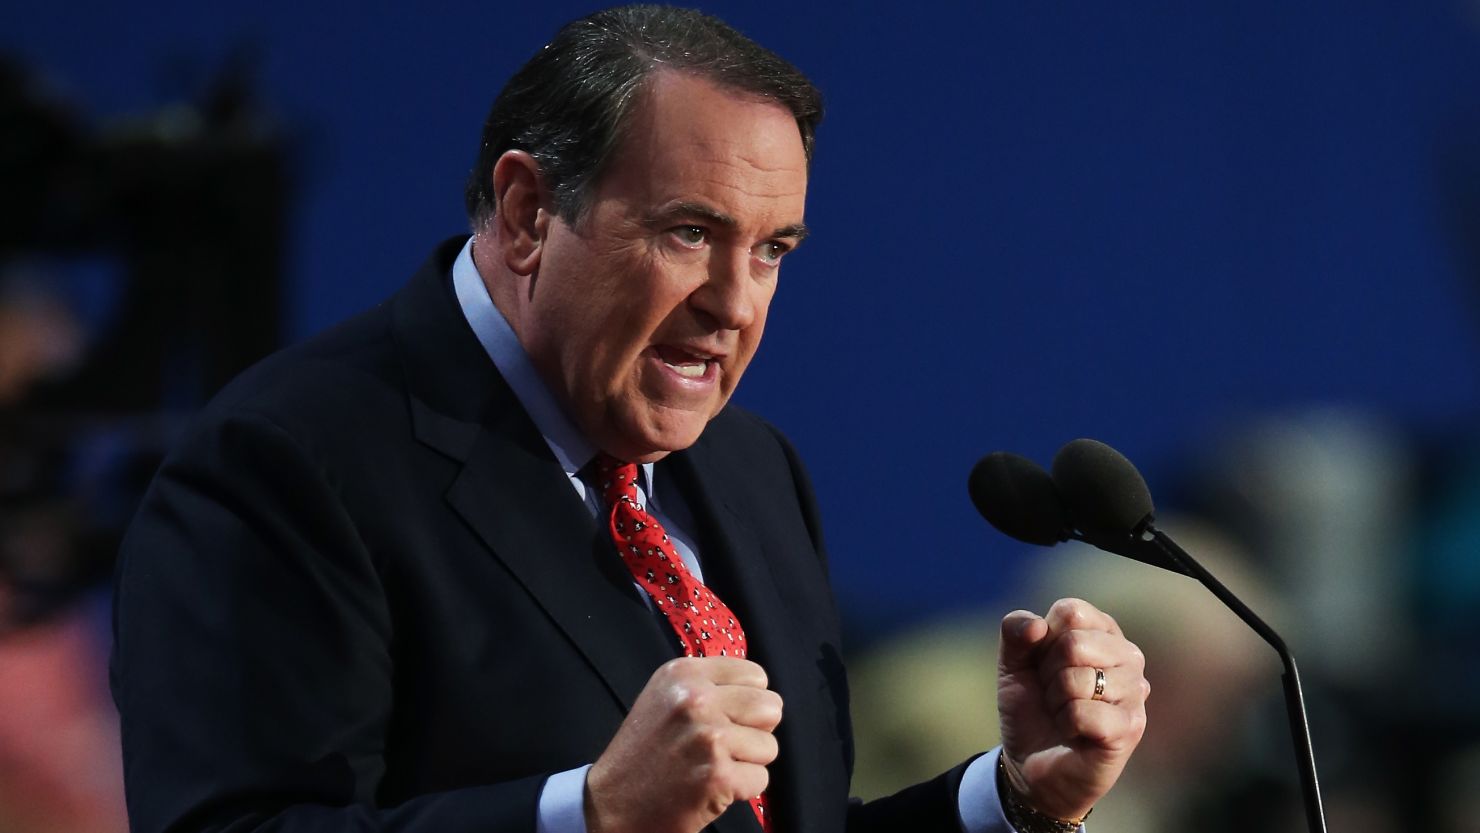 Former Arkansas Gov. Mike Huckabee says the Obamas are "great parents" but shouldn't let their daughters listen to Beyonce.